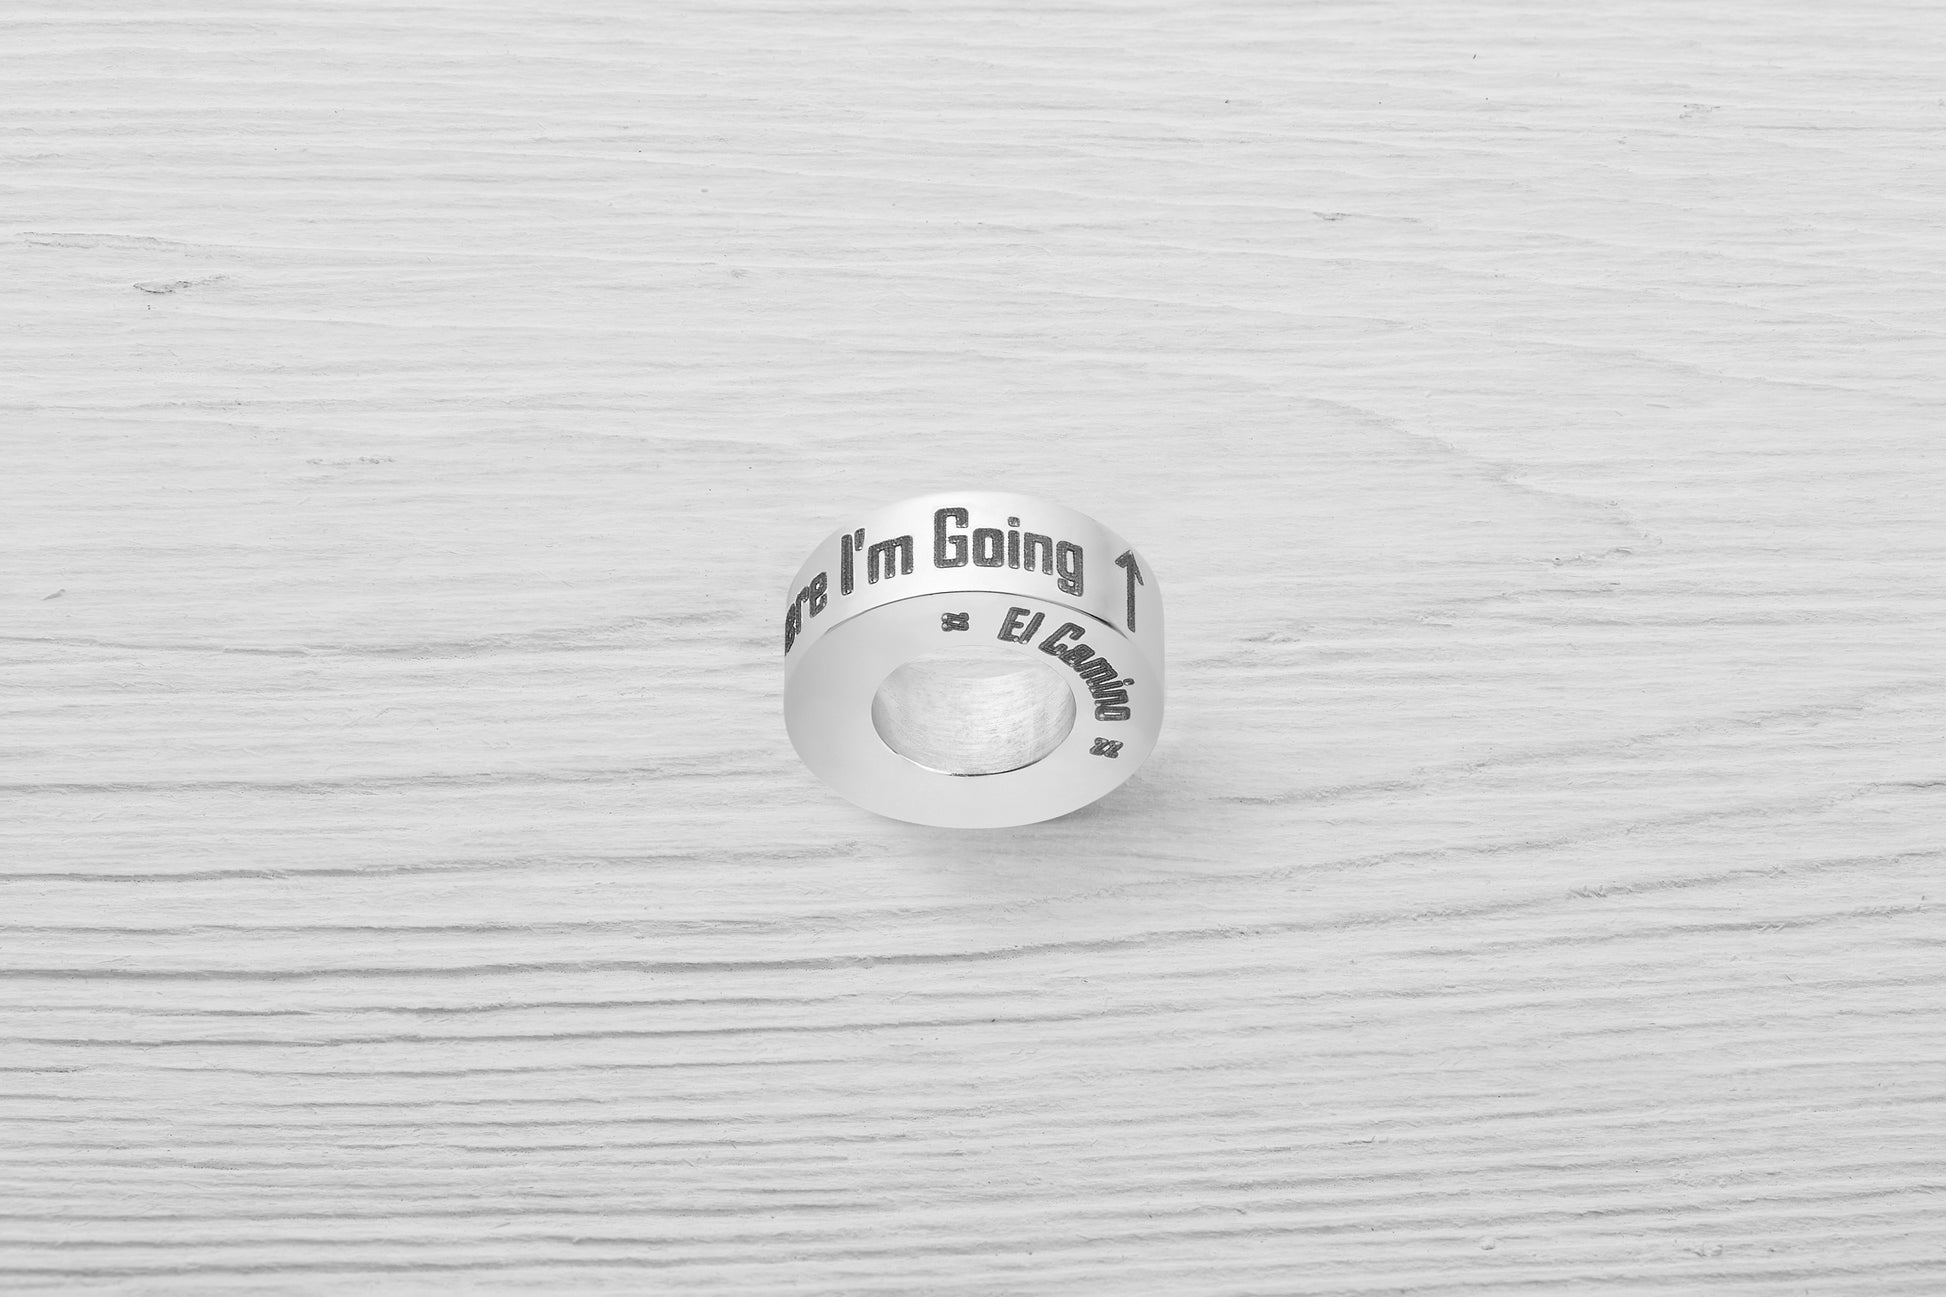 "Where I'm going" (Up Arrow) Divider Travel Charm Bead